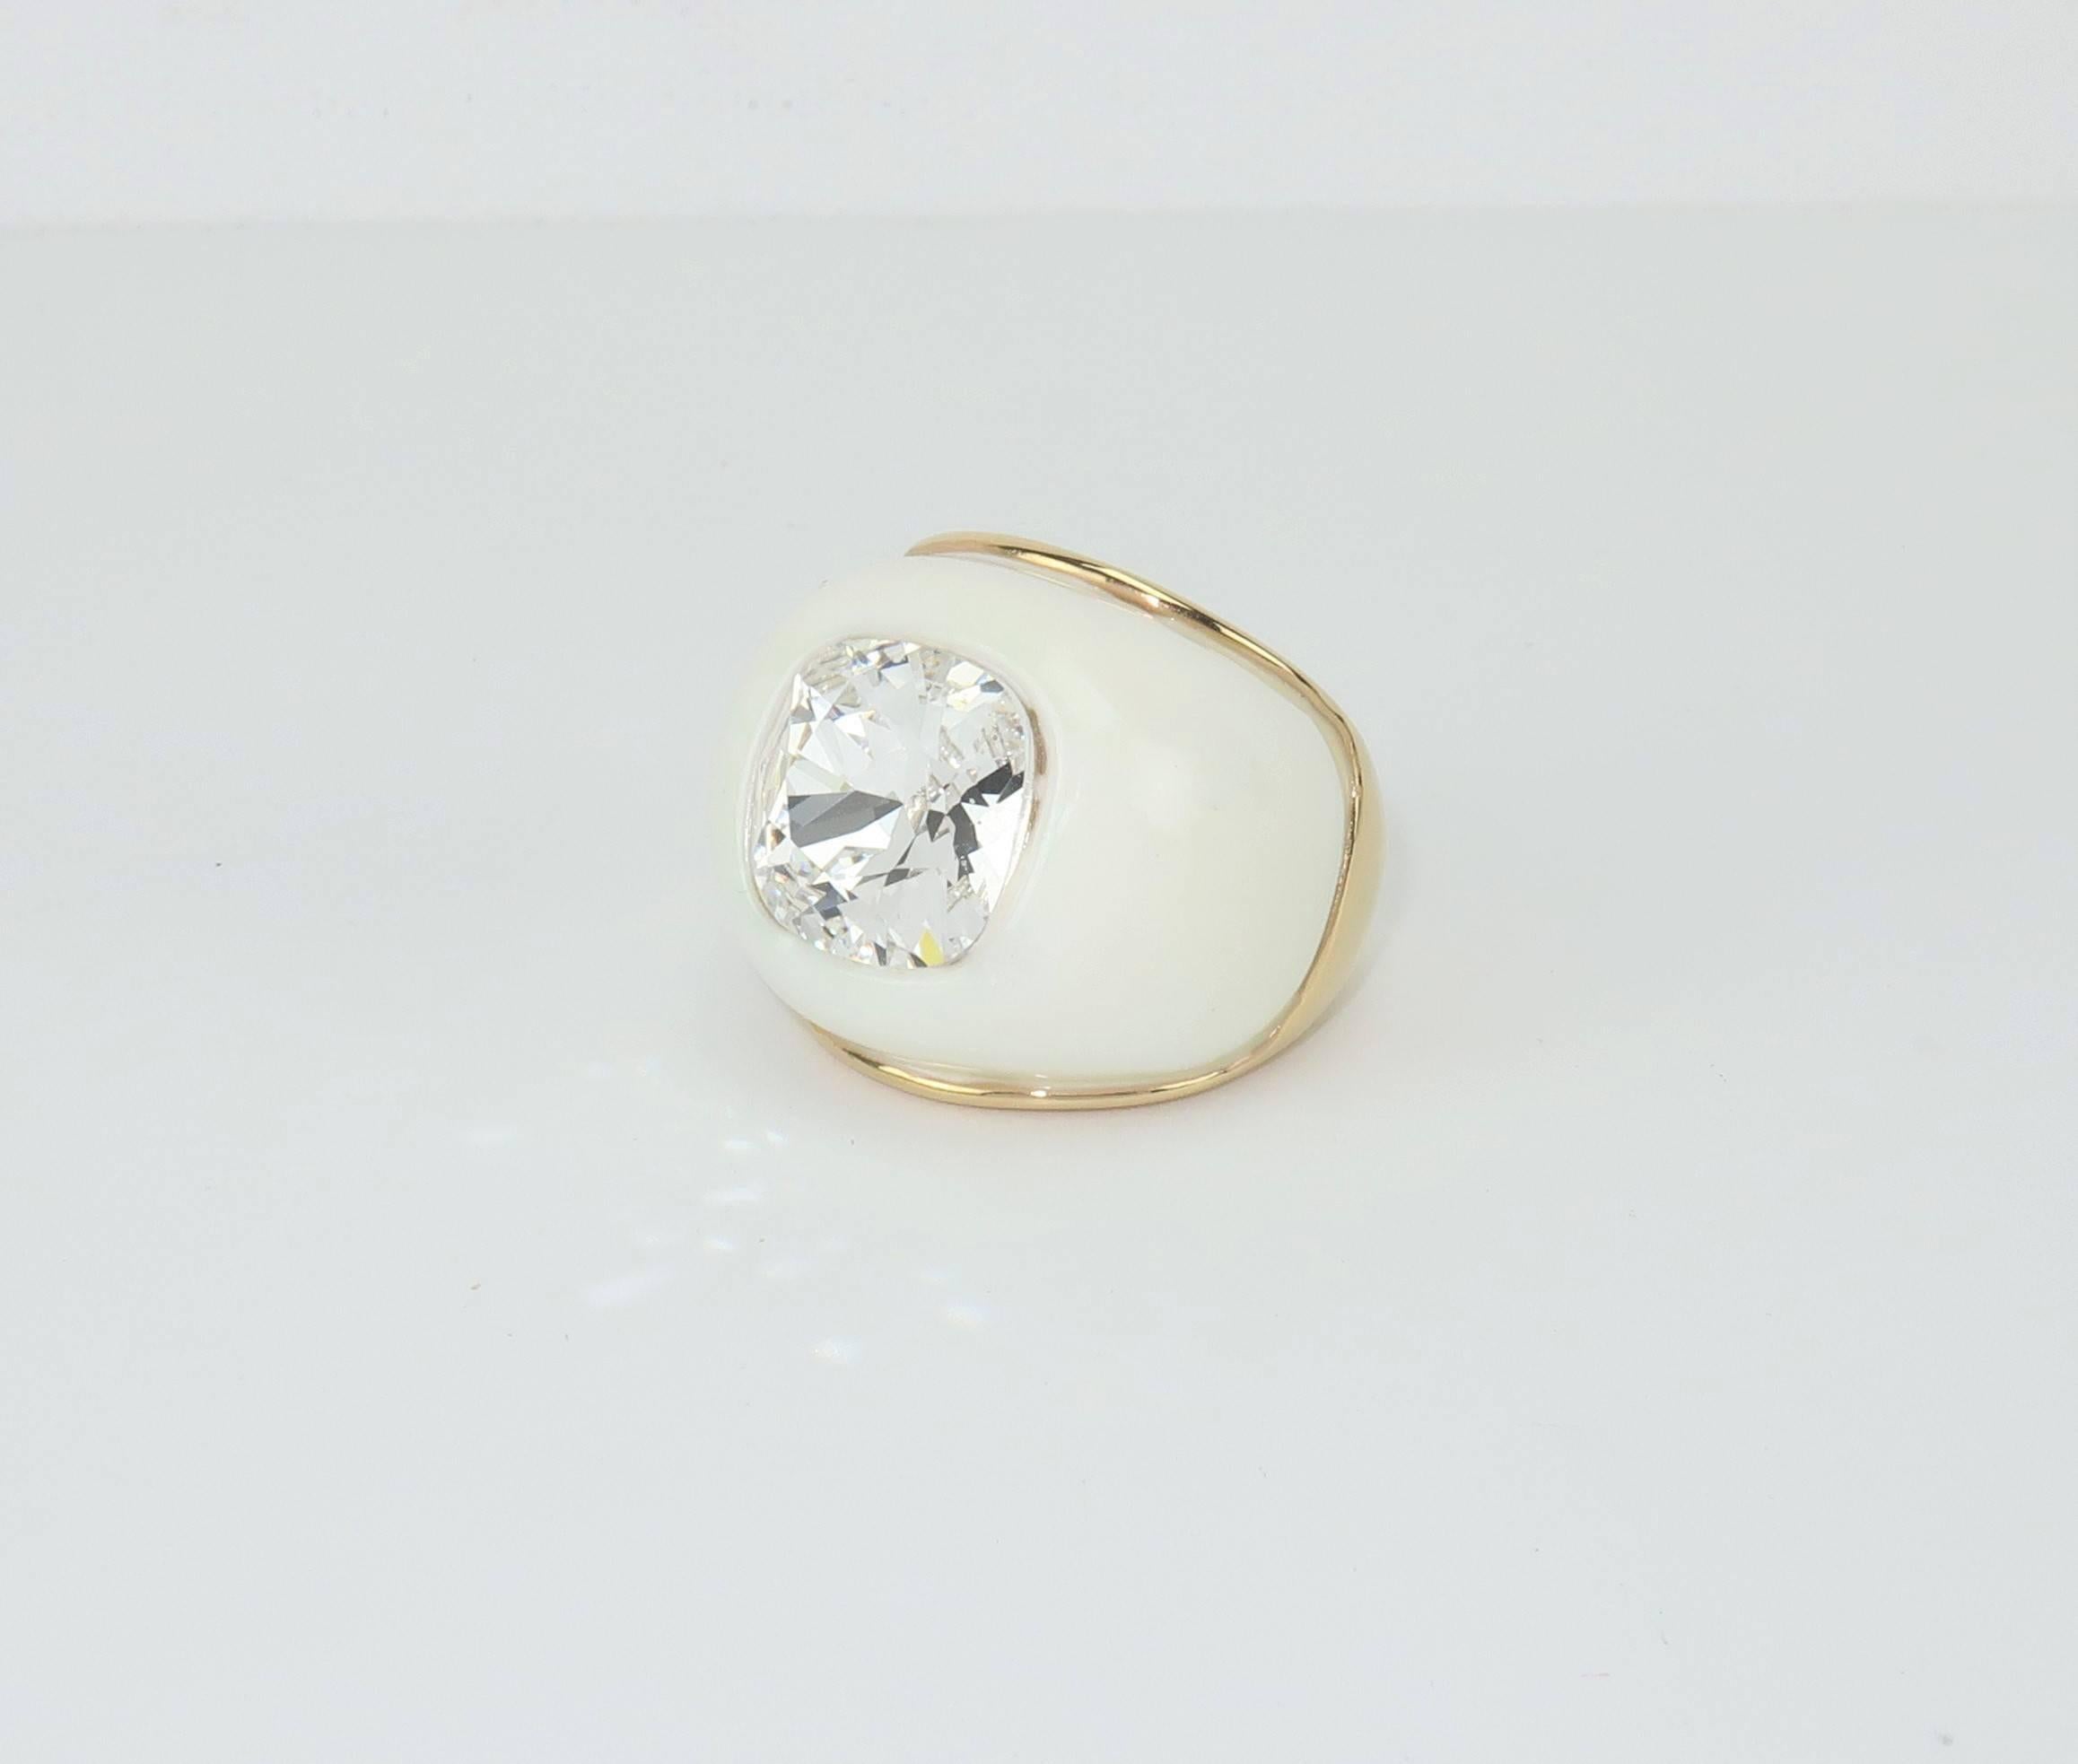 Kenneth Jay Lane's jewelry has always been defined by bold and dramatic designs that earned him the reputation of successfully making faux jewelry chic.  This contemporary white dome ring stands out not only for its chunky size but also for the